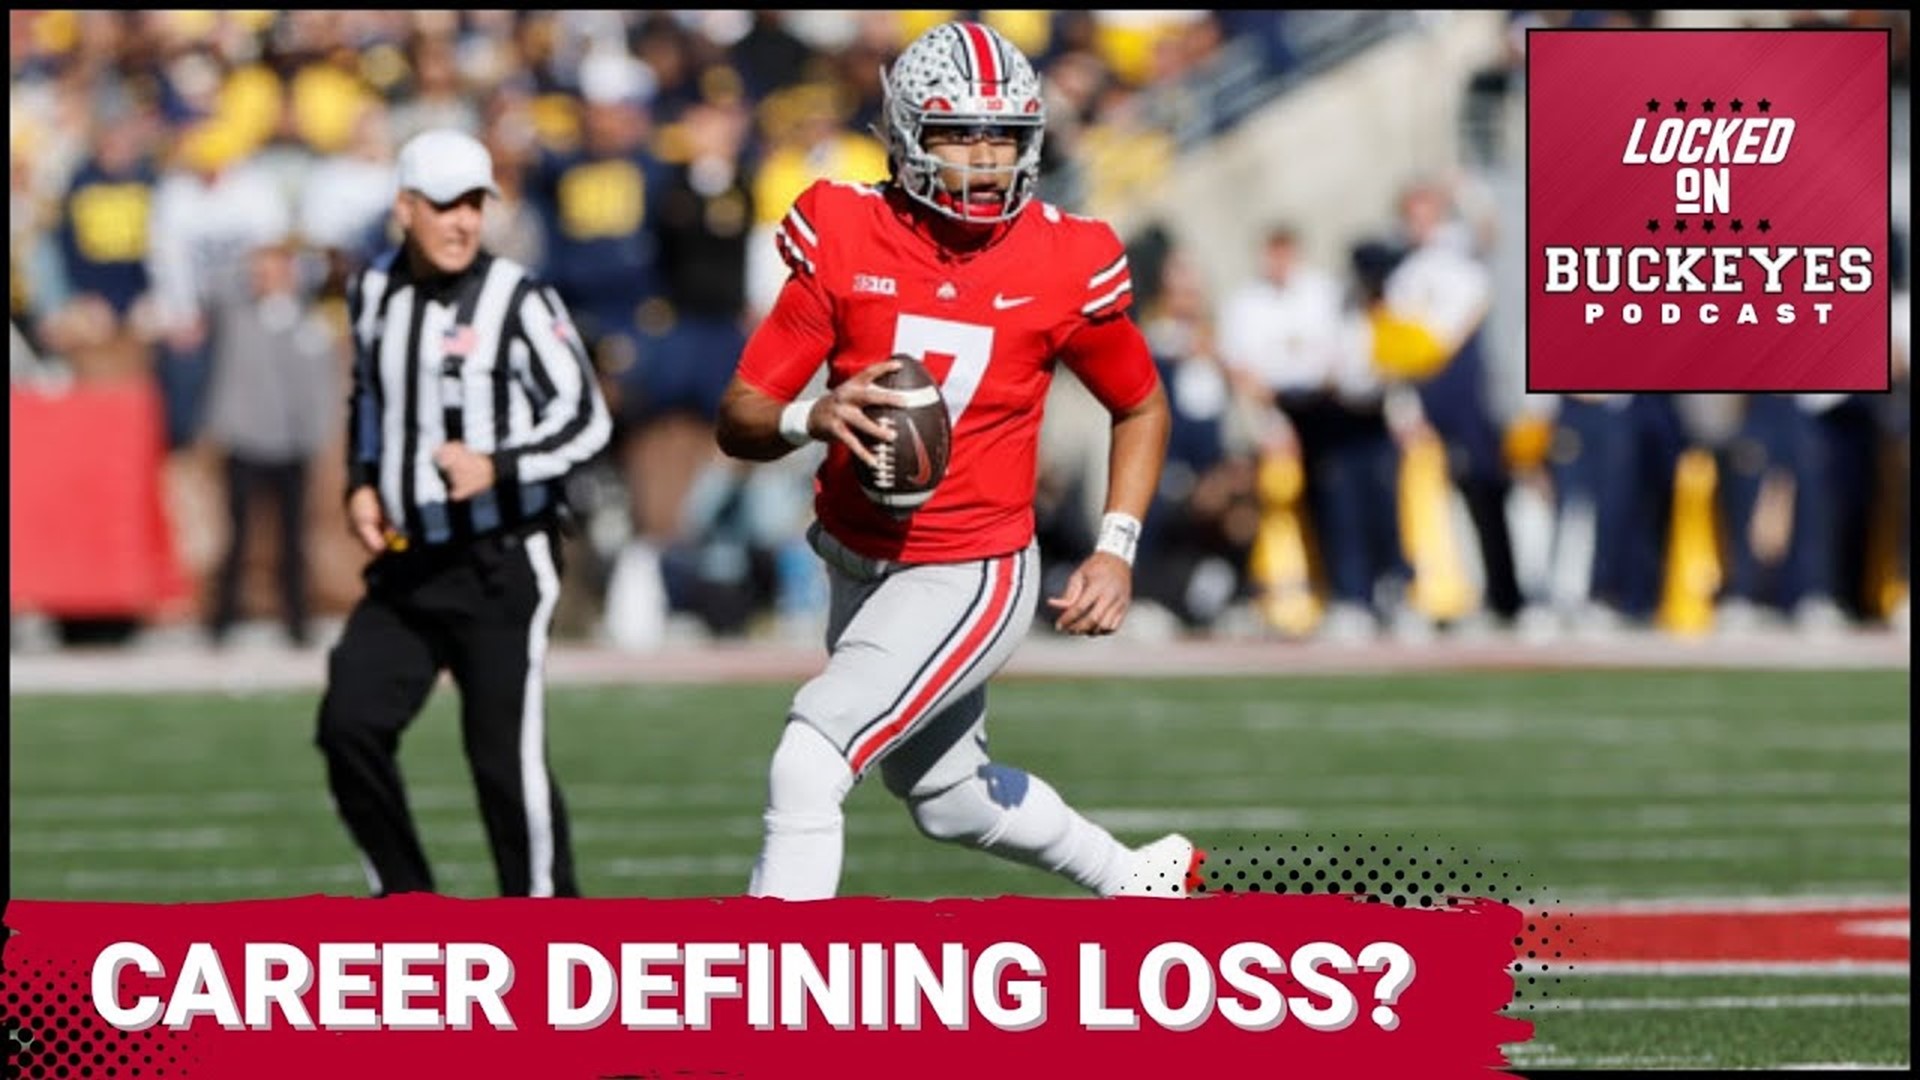 It was a disappointing loss for the Ohio Sate Buckeyes as they fell to Michigan on Saturday night.